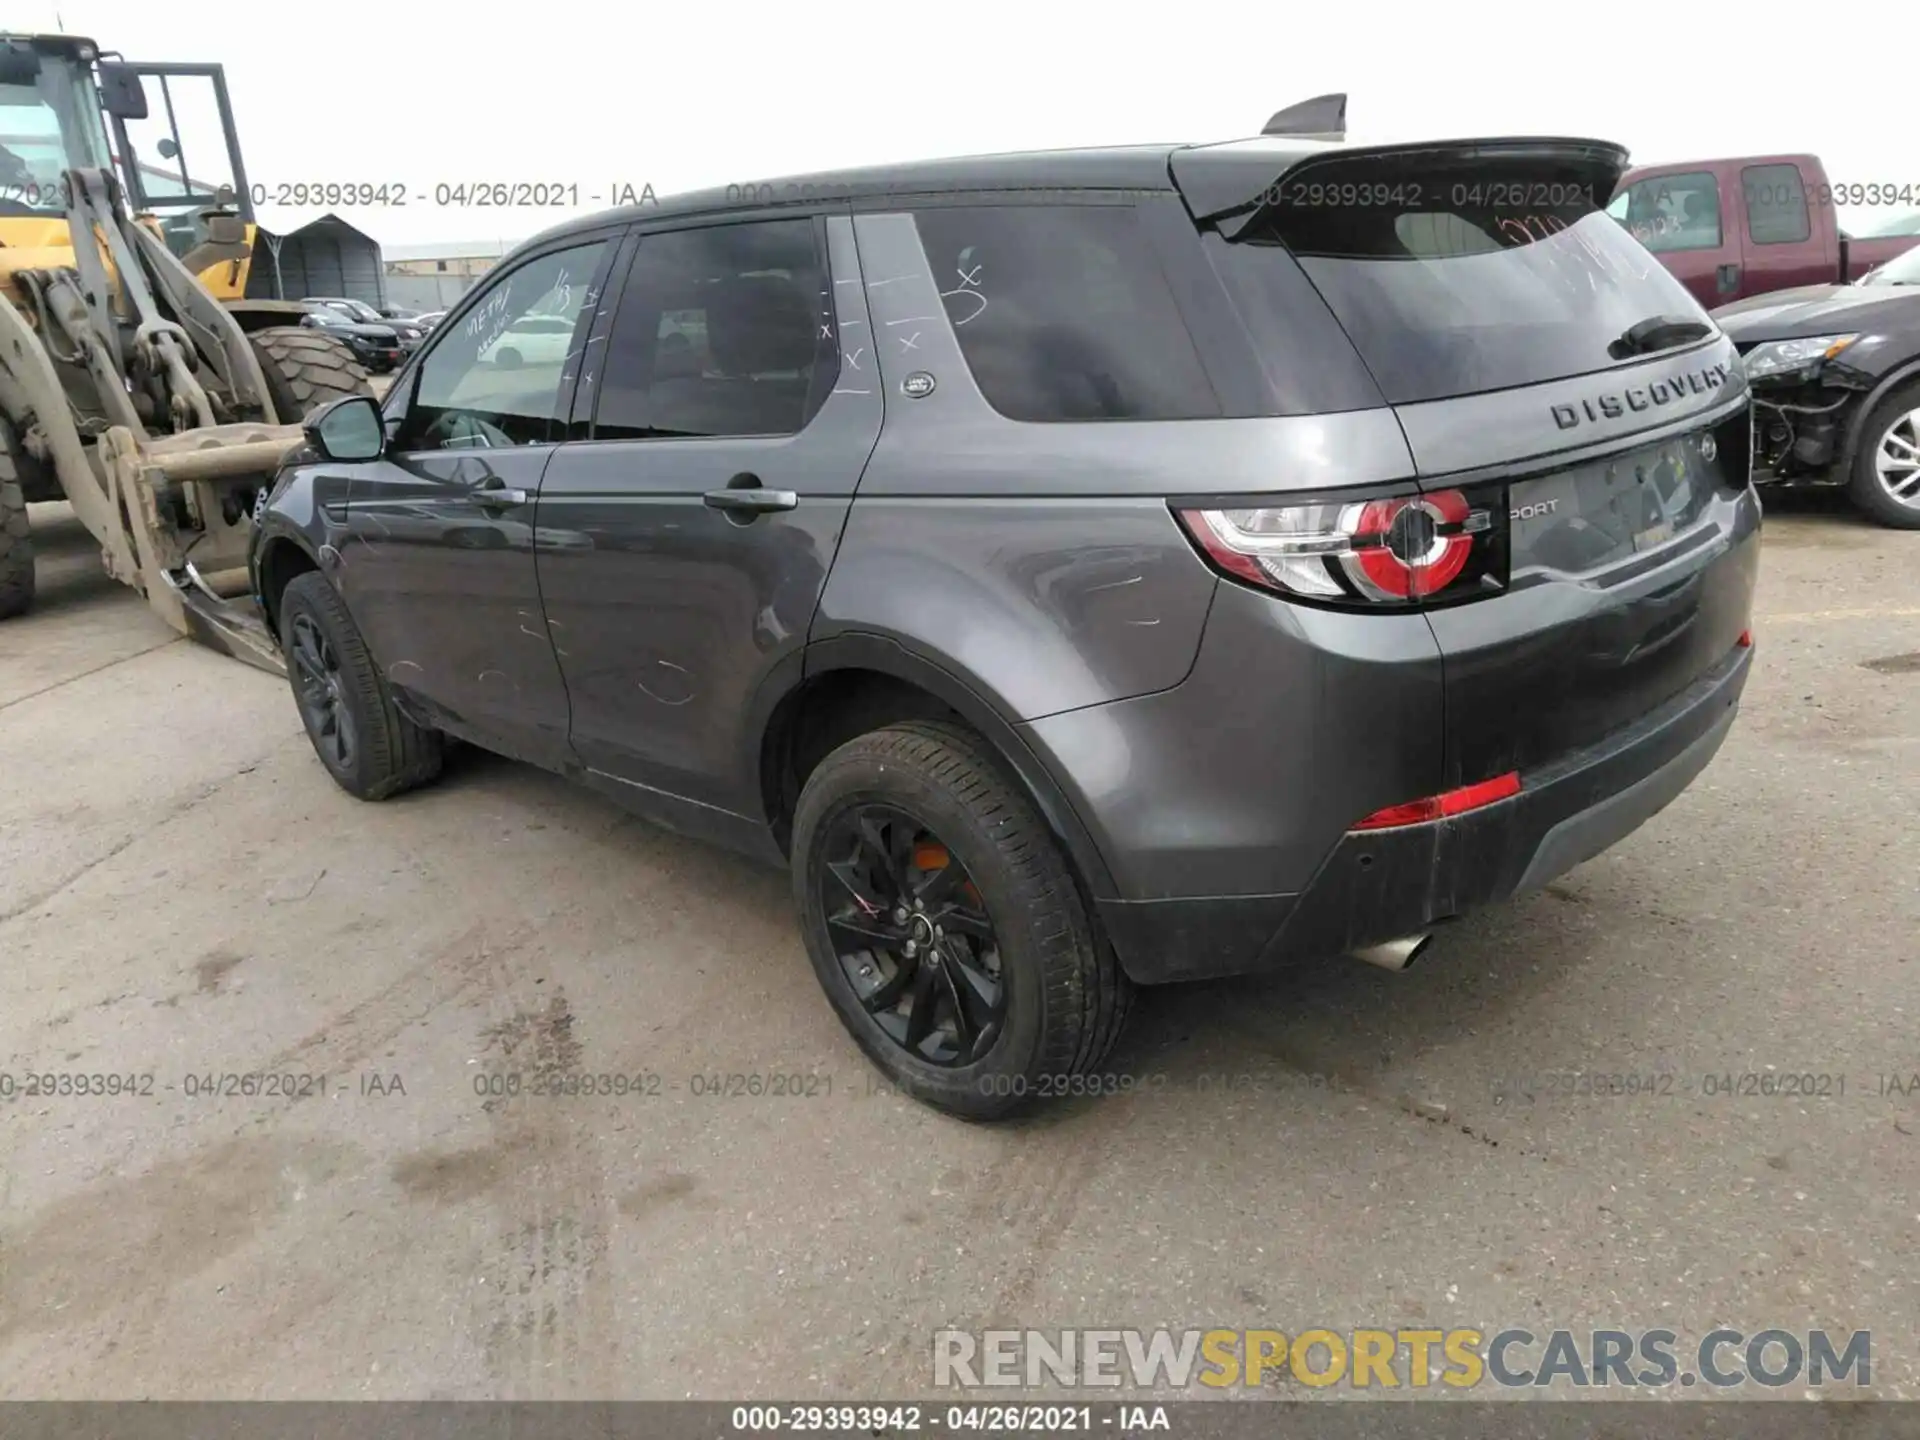 3 Photograph of a damaged car SALCP2FX9KH795815 LAND ROVER DISCOVERY SPORT 2019